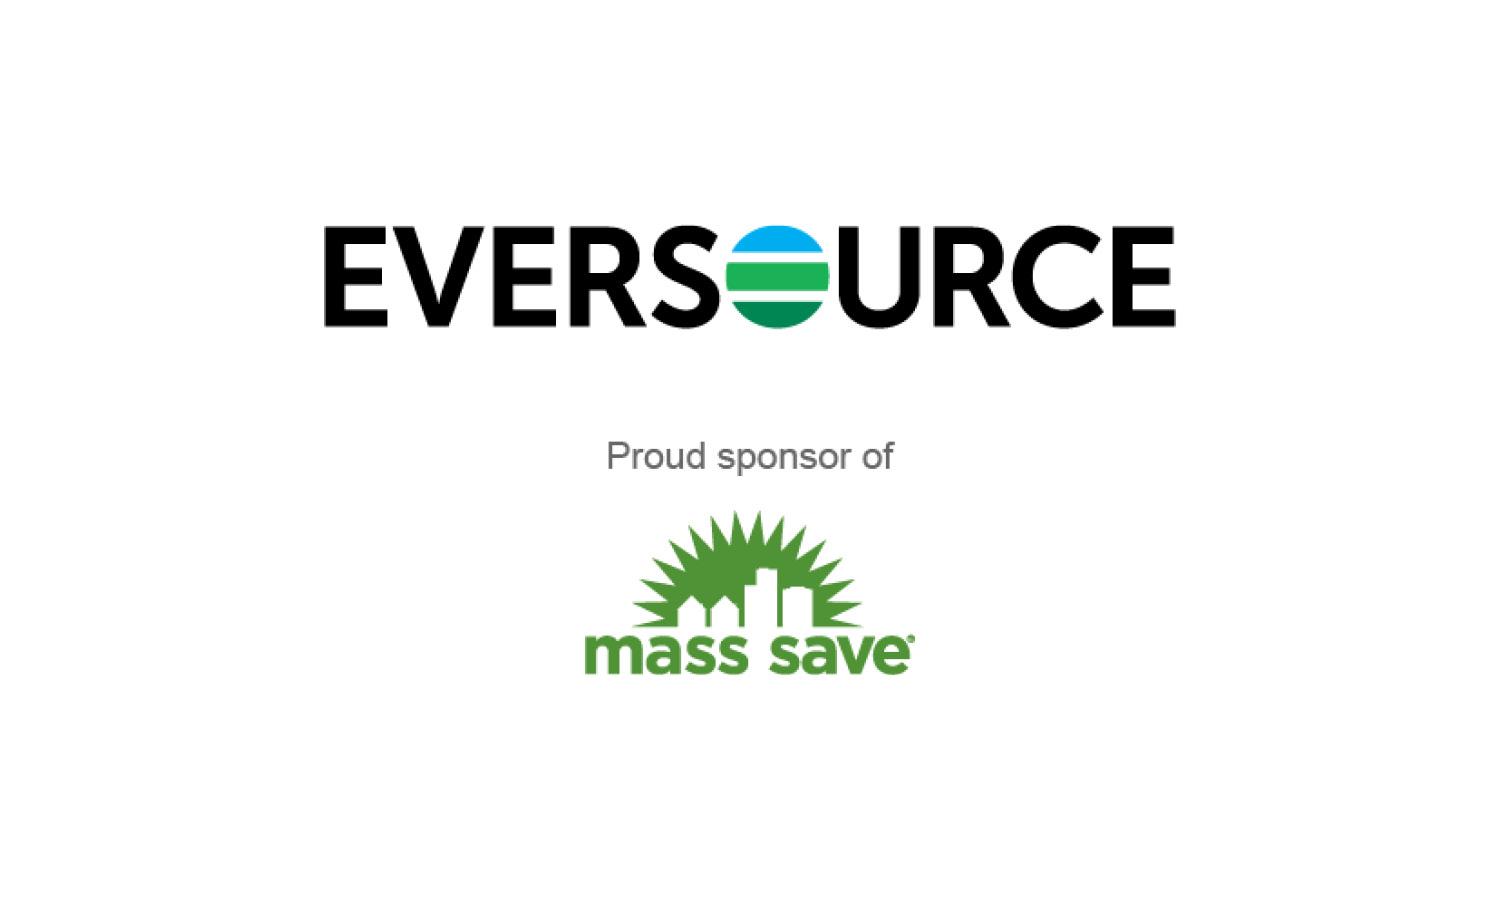 Eversource: Proud Sponsor of Mass Save